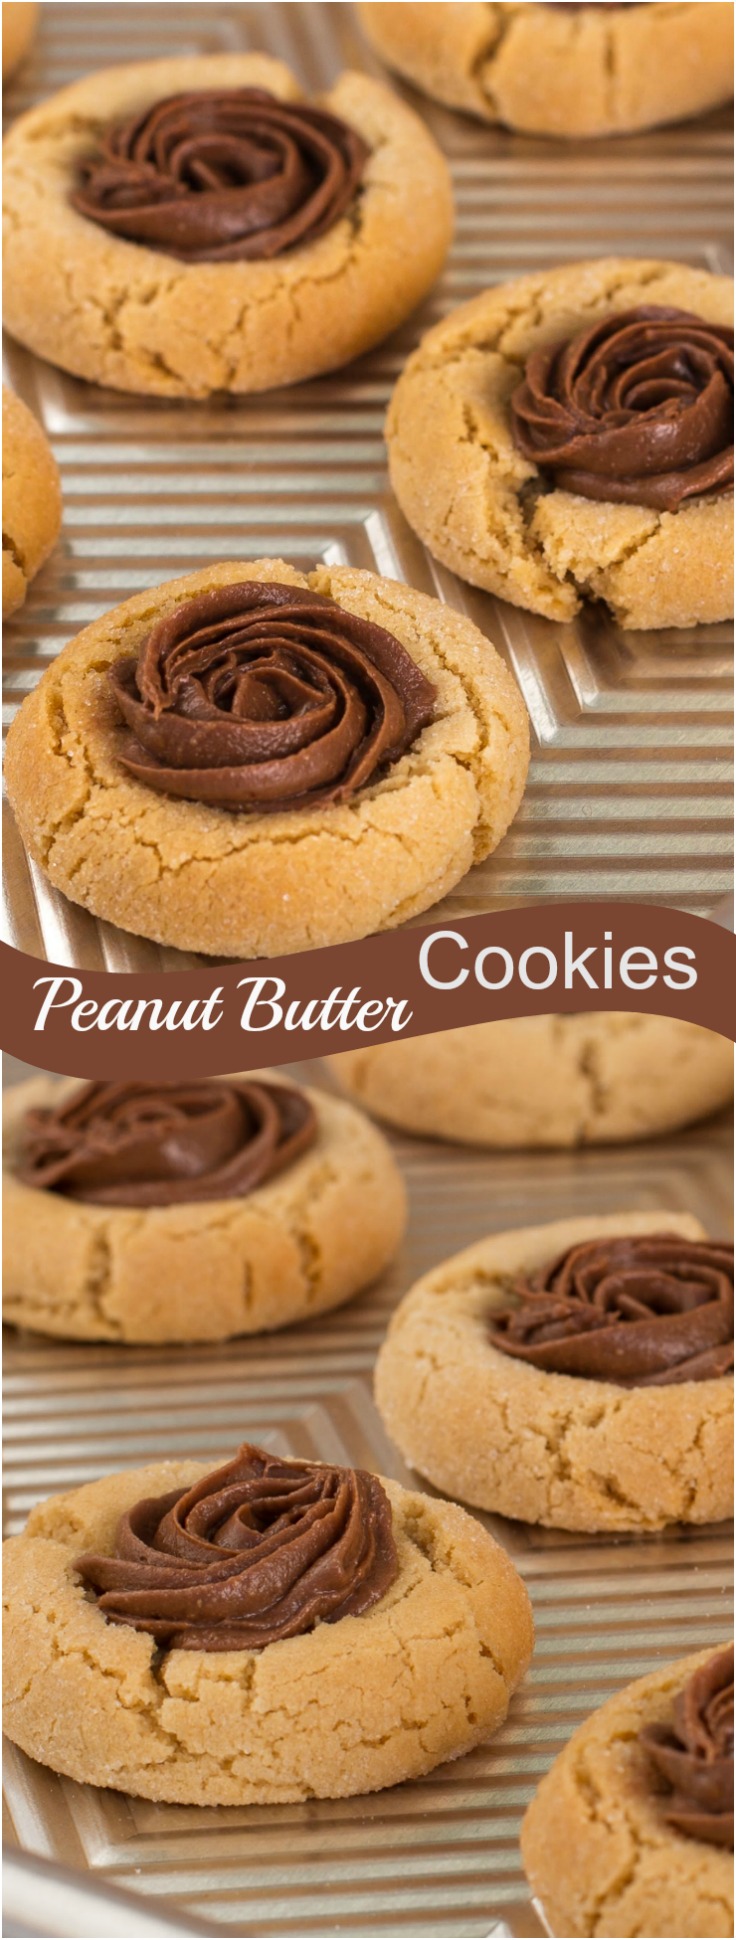 Peanut Butter Cookies are a classic, and this recipe is easy to make with a soft cookie inside, crisp on the outside! Perfect for making thumbprint cookies. via @artandthekitch